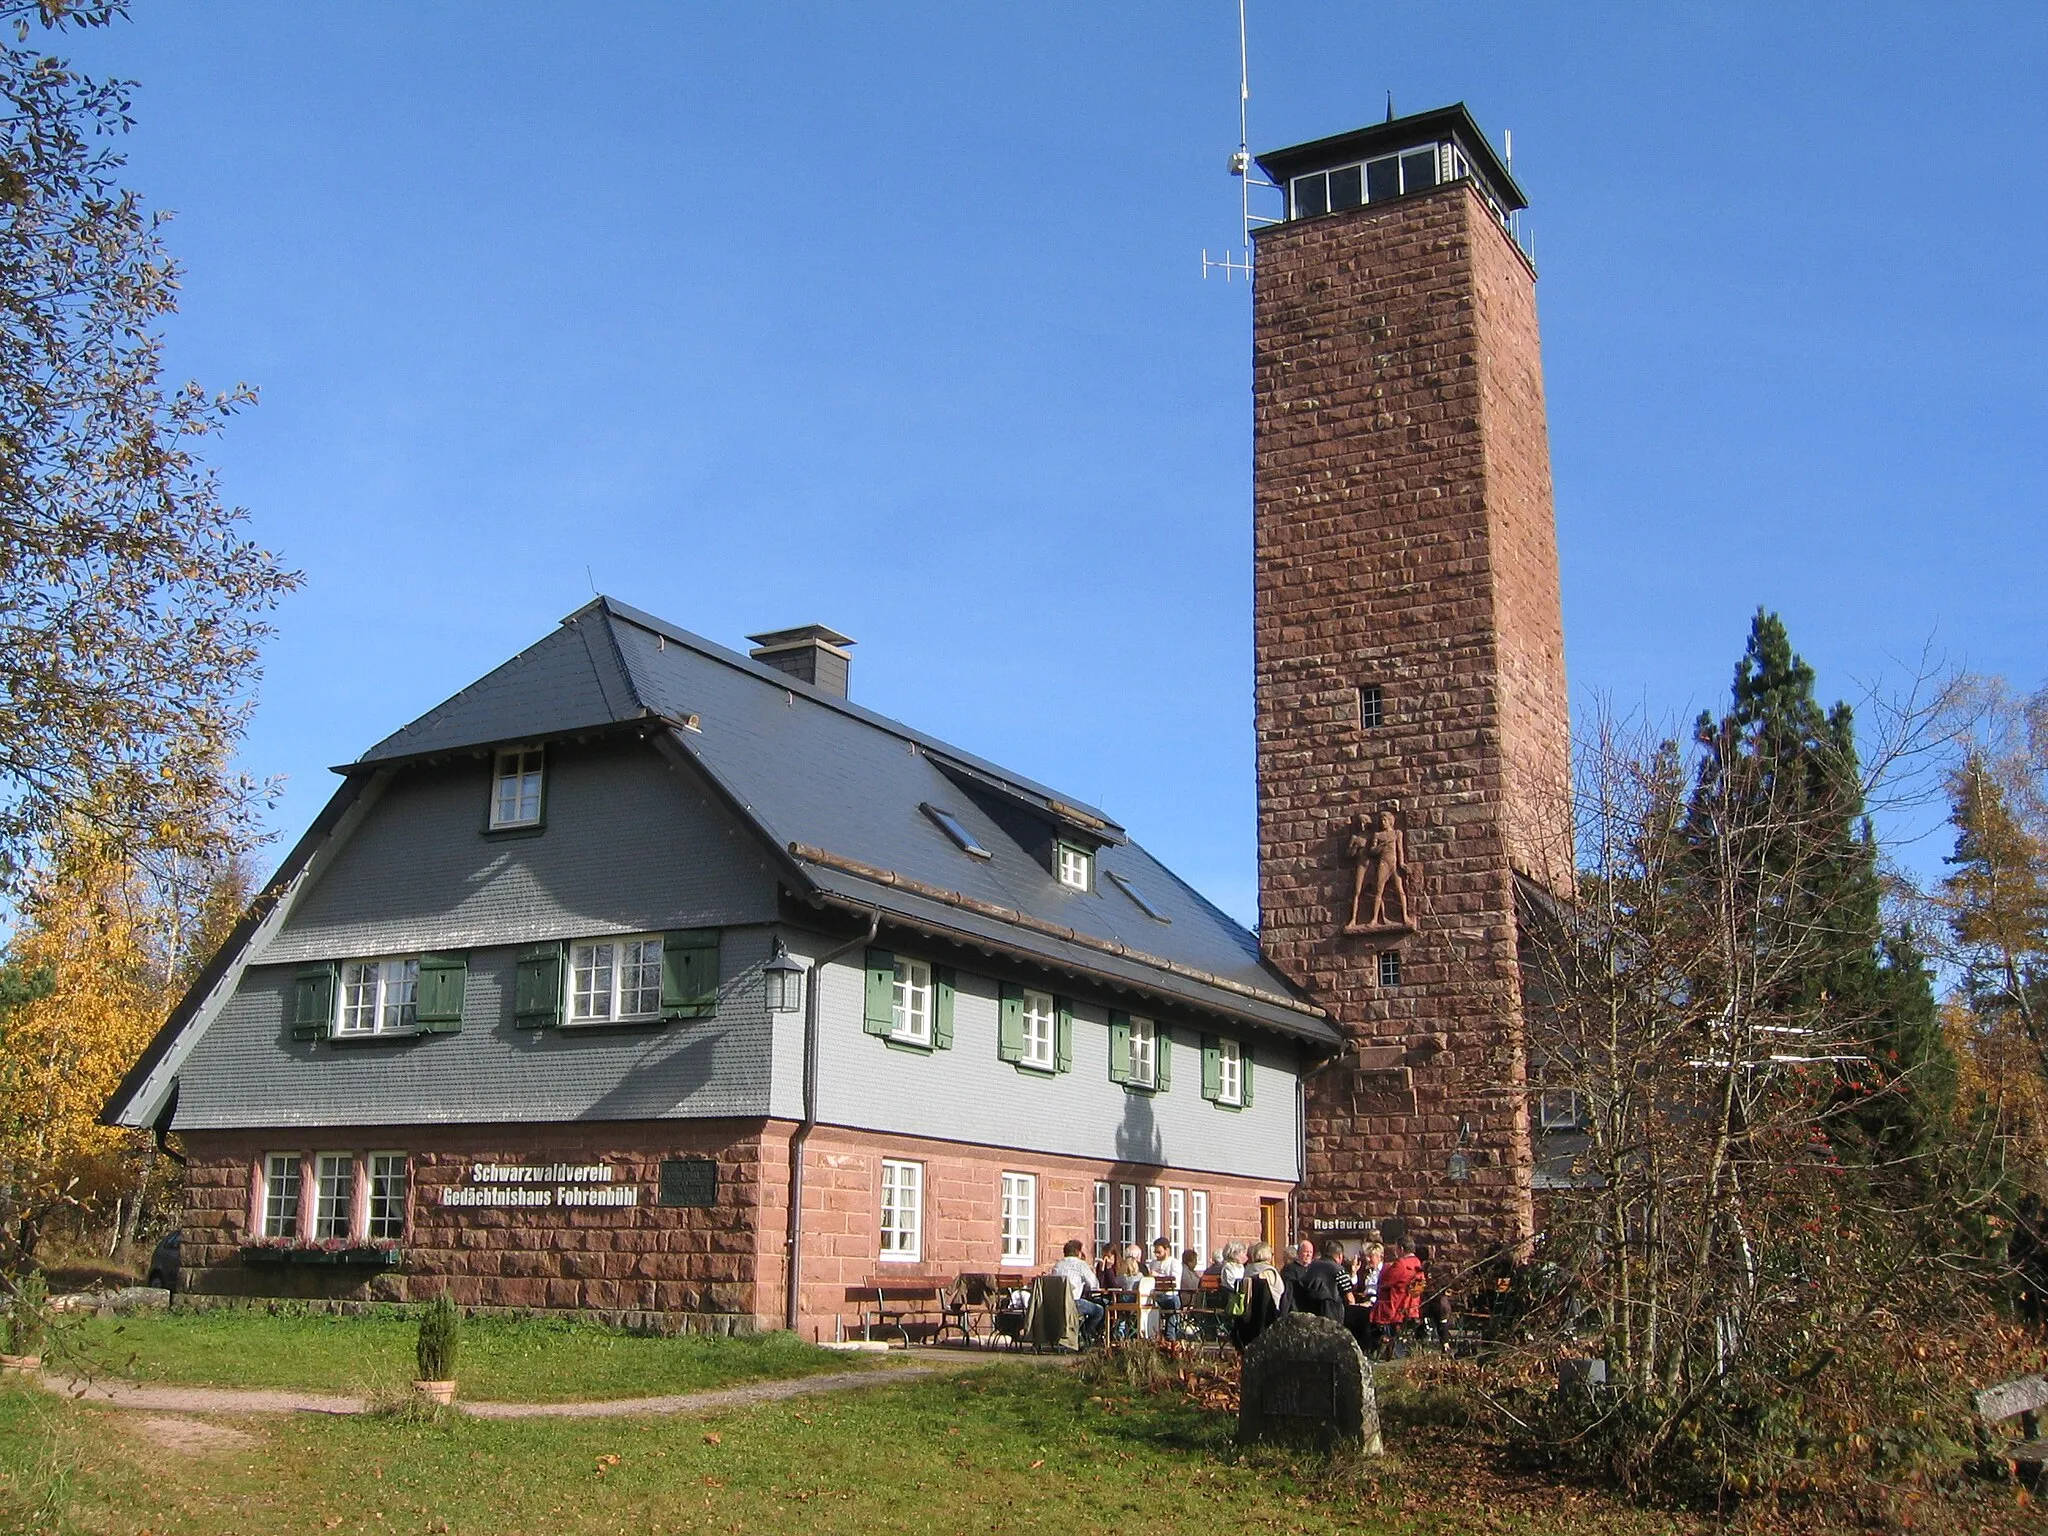 Photo showing: Observation tower at Mooswaldkopf near Schramberg in the Black Forest.